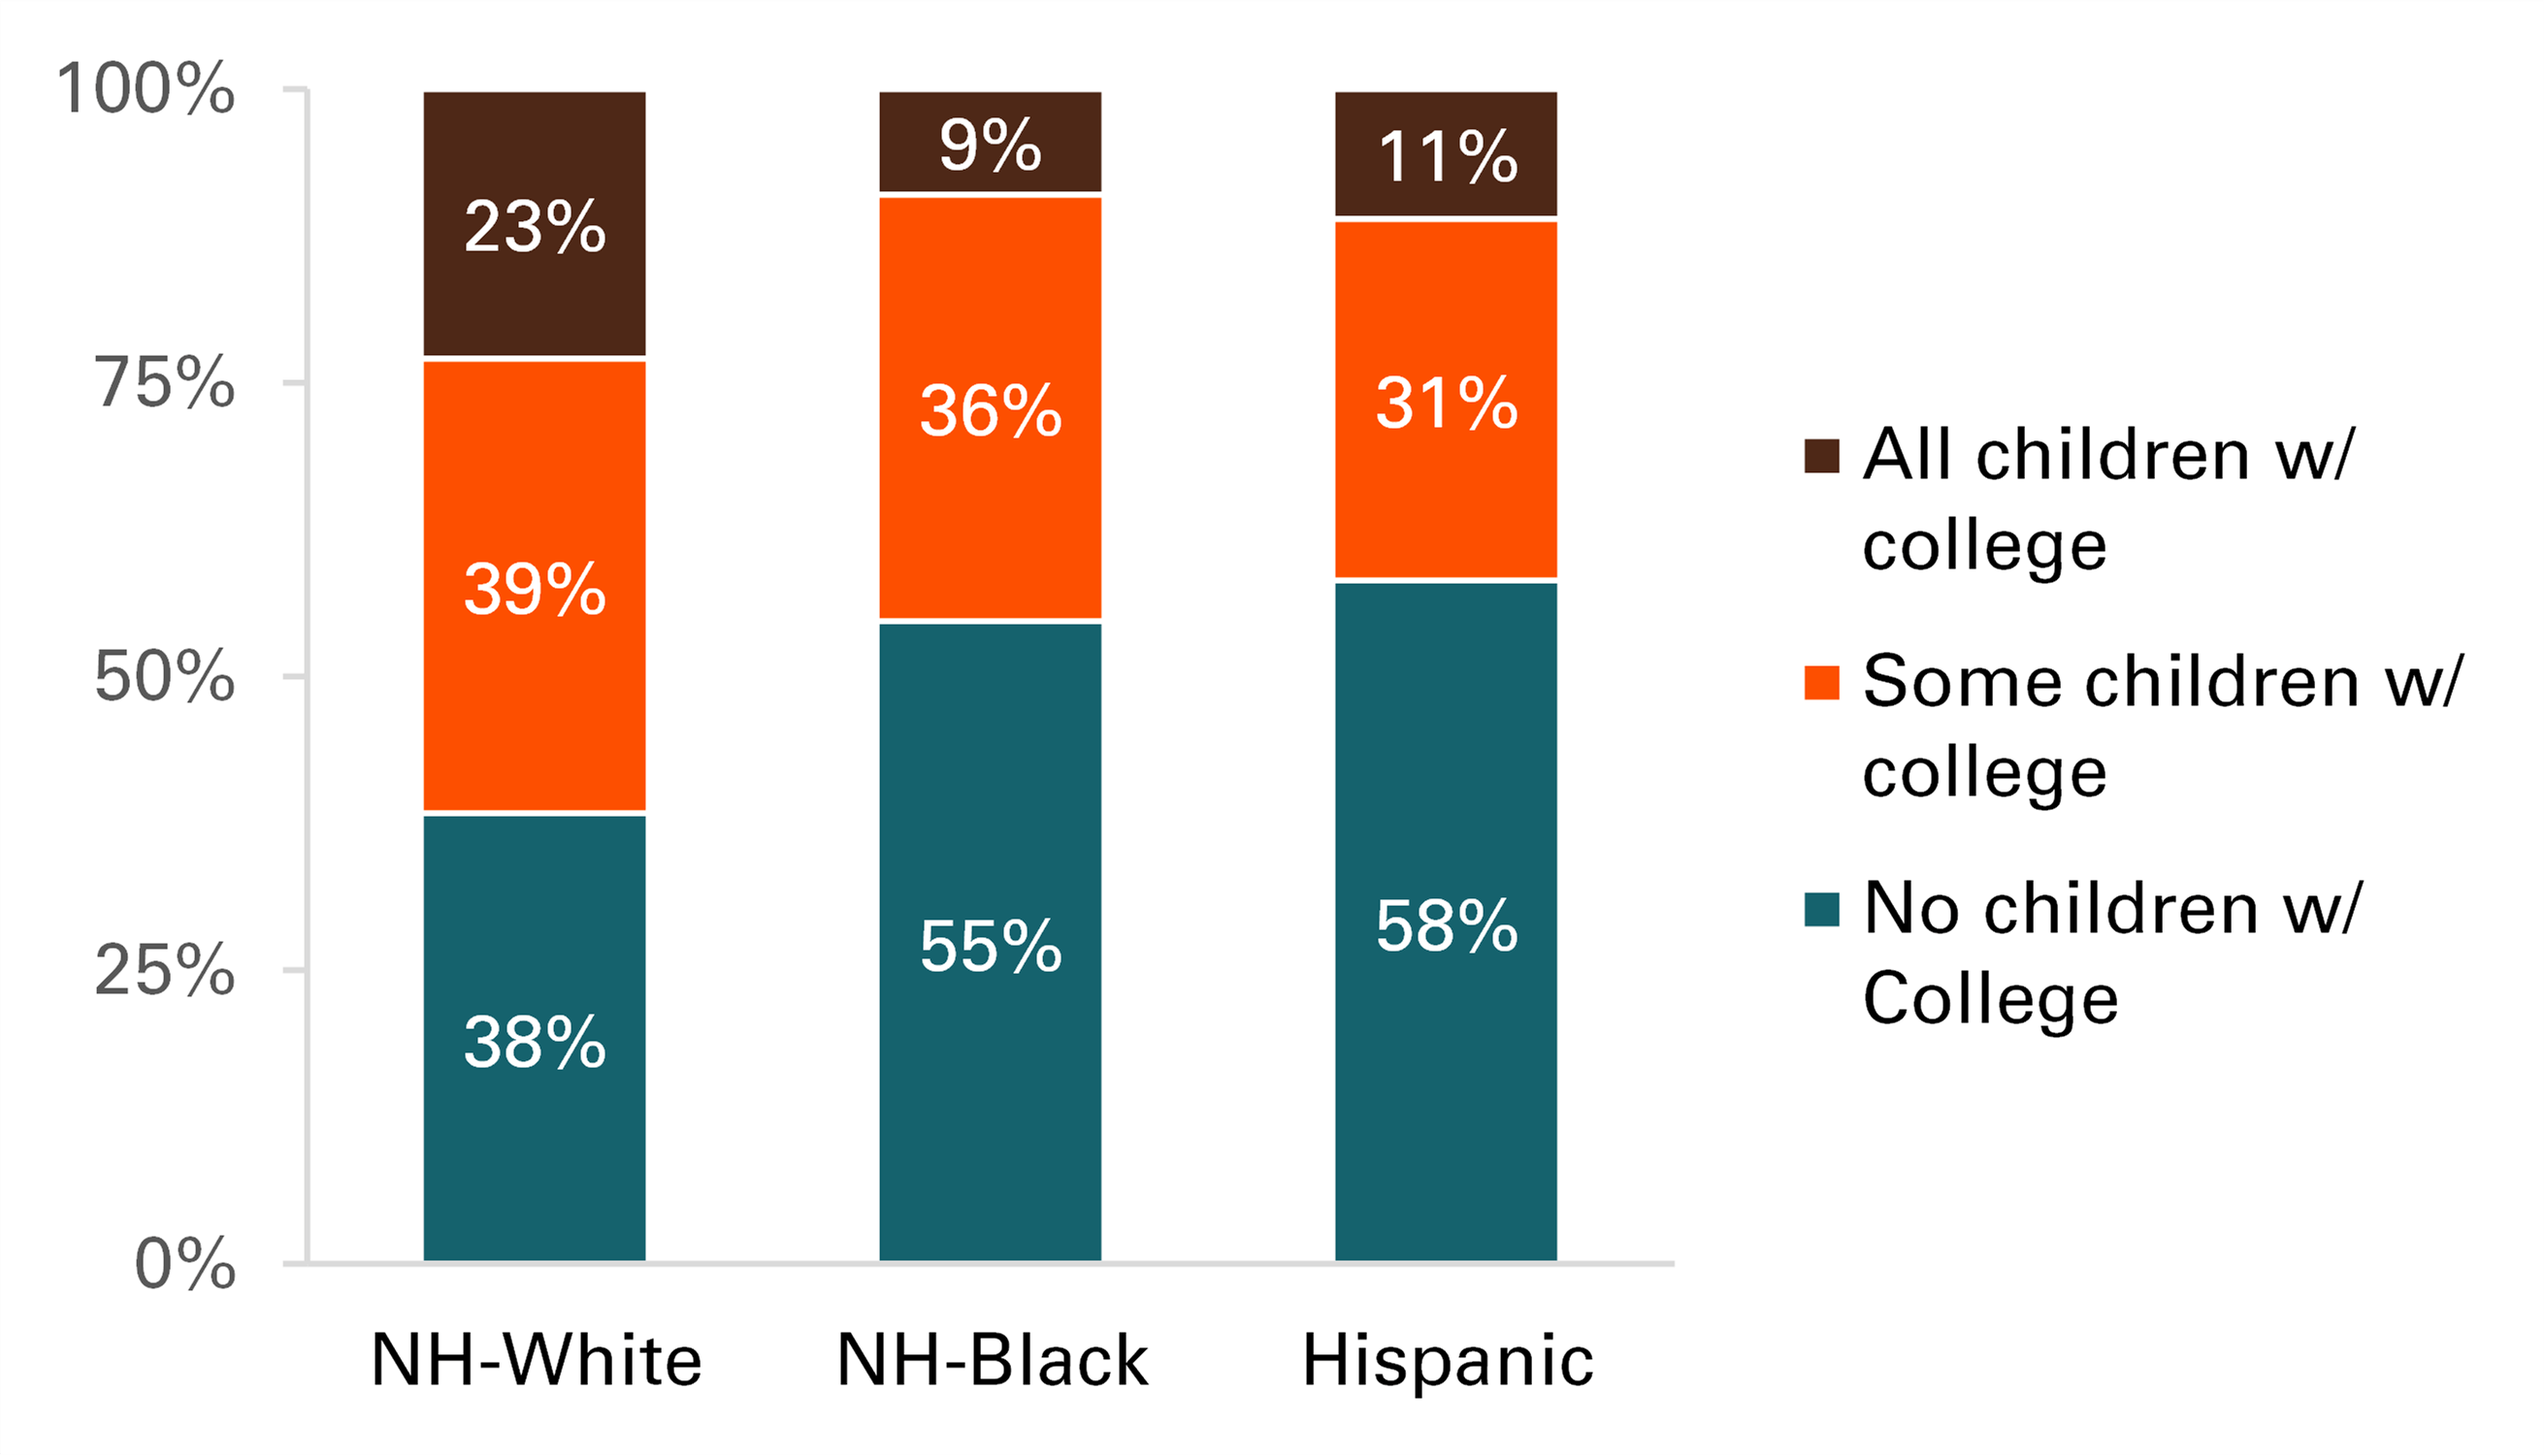 graph showing Figure 1. Share of Children with a College Degree by Parent’s Race/Ethnicity, 2014